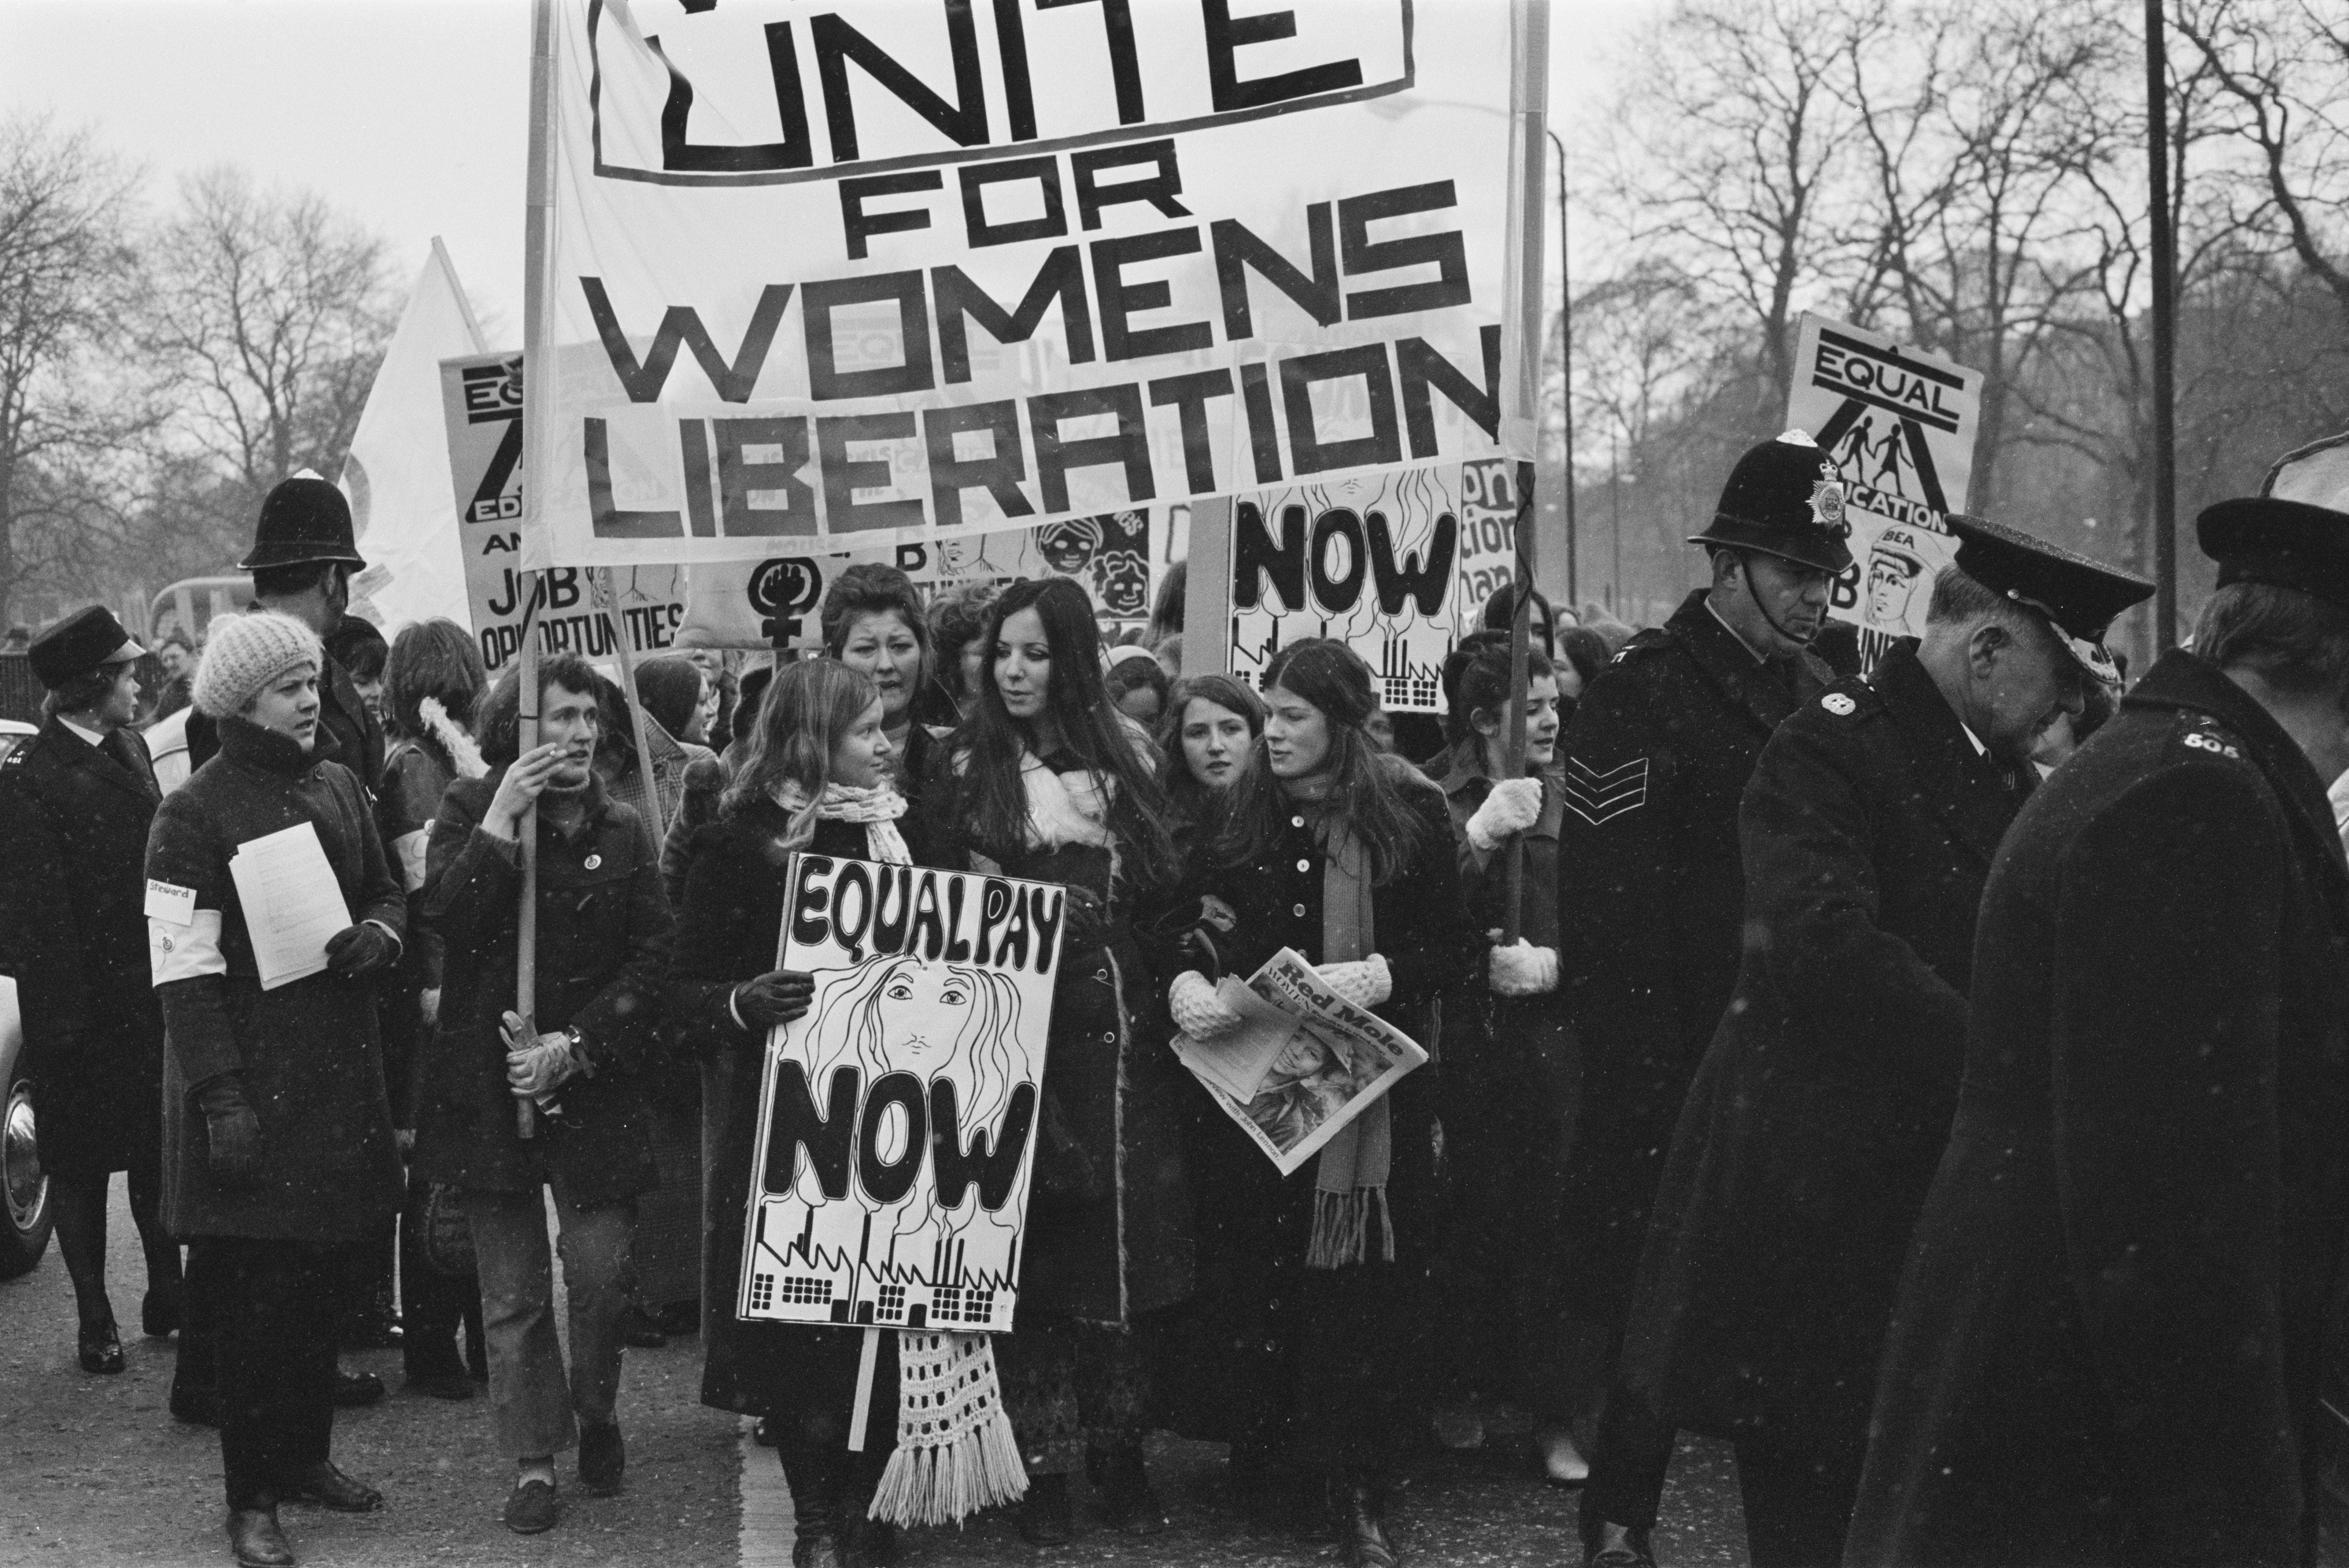 Members of the National Women's Liberation Movement, on an equal rights march from Speaker's Corner to No.10 Downing Street, to mark International Women's Day, London, 6th March 1971. One woman is carrying a placard reading 'Equal Pay Now'. On the right, a woman is holding a copy of the Trotskyist publication 'Red Mole'.